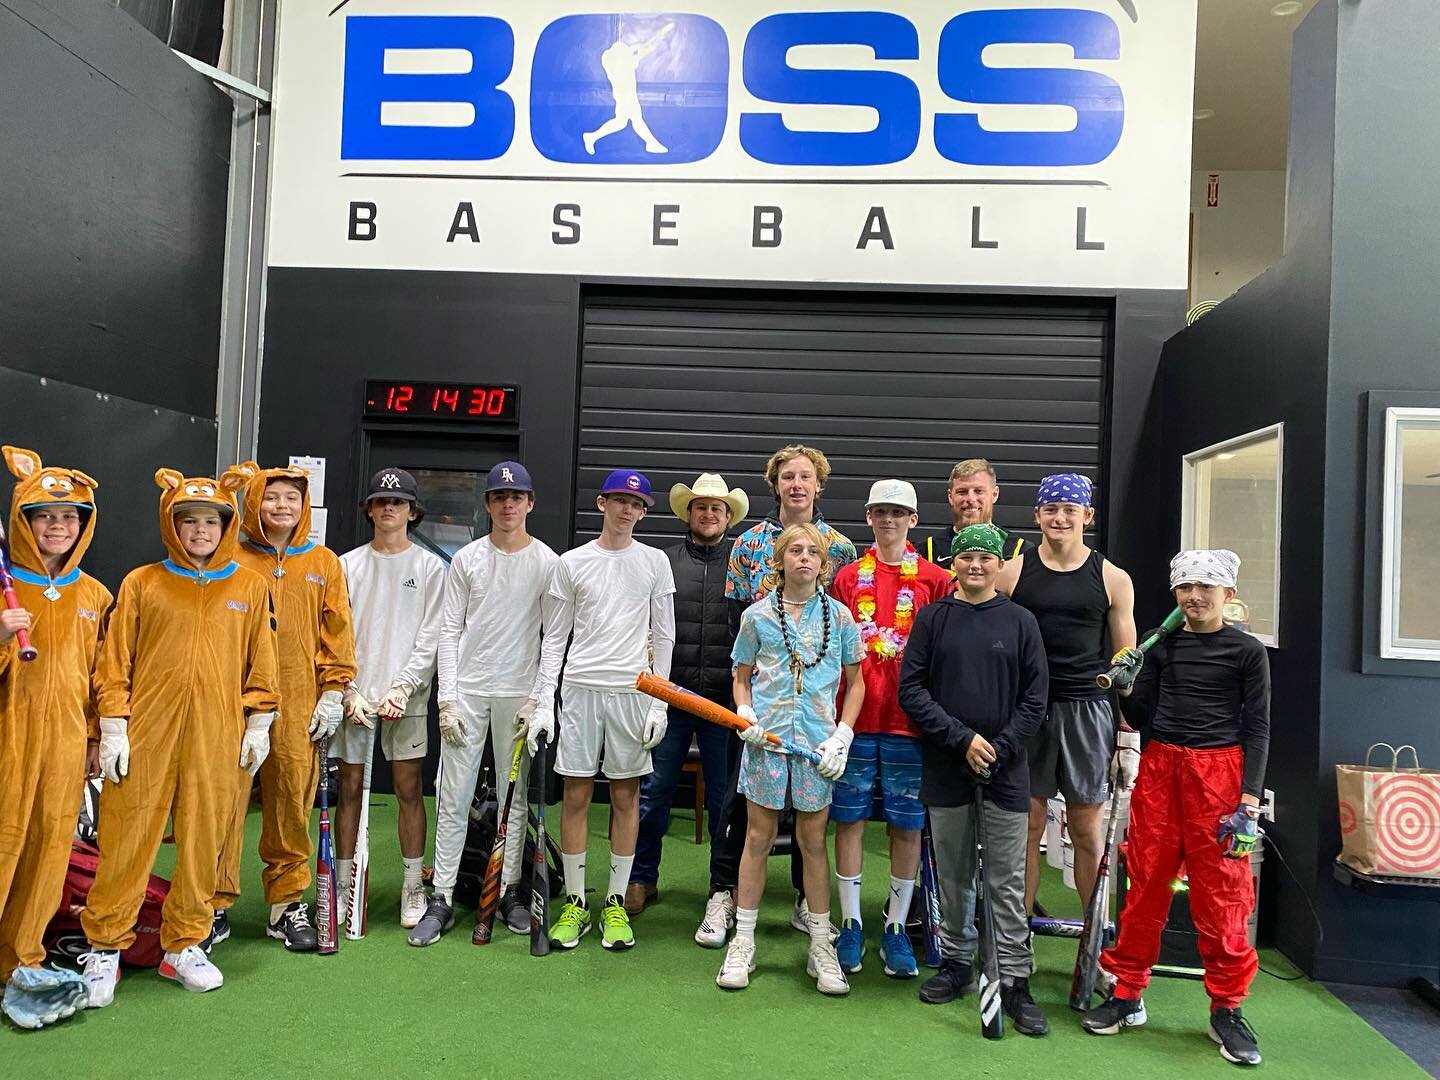 We had pirates 🏴&zwj;☠️, ghosts 👻, Island Bois 🌴, Scooby Doo 🐕, Babe Ruth 🏟️, Bananas 🍌, and many others make appearances at Boss Baseball&rsquo;s first annual Monster Mash @hittraxofficial Tournament! ⚾️🎃

Thanks to everyone who made it a suc